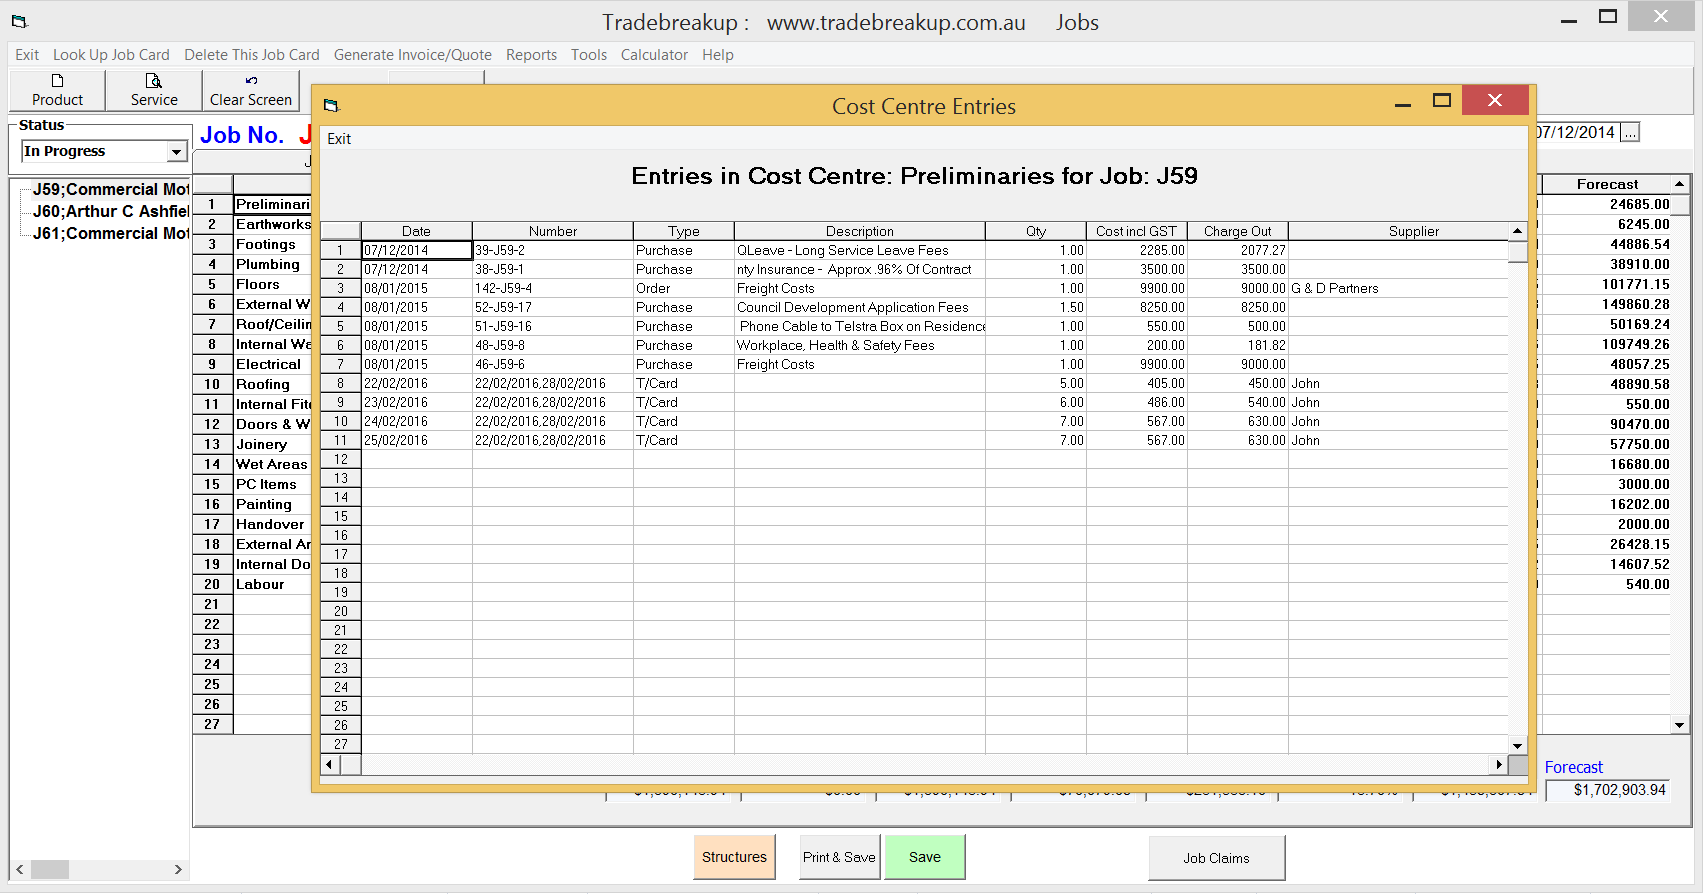 Cost Centre Entries